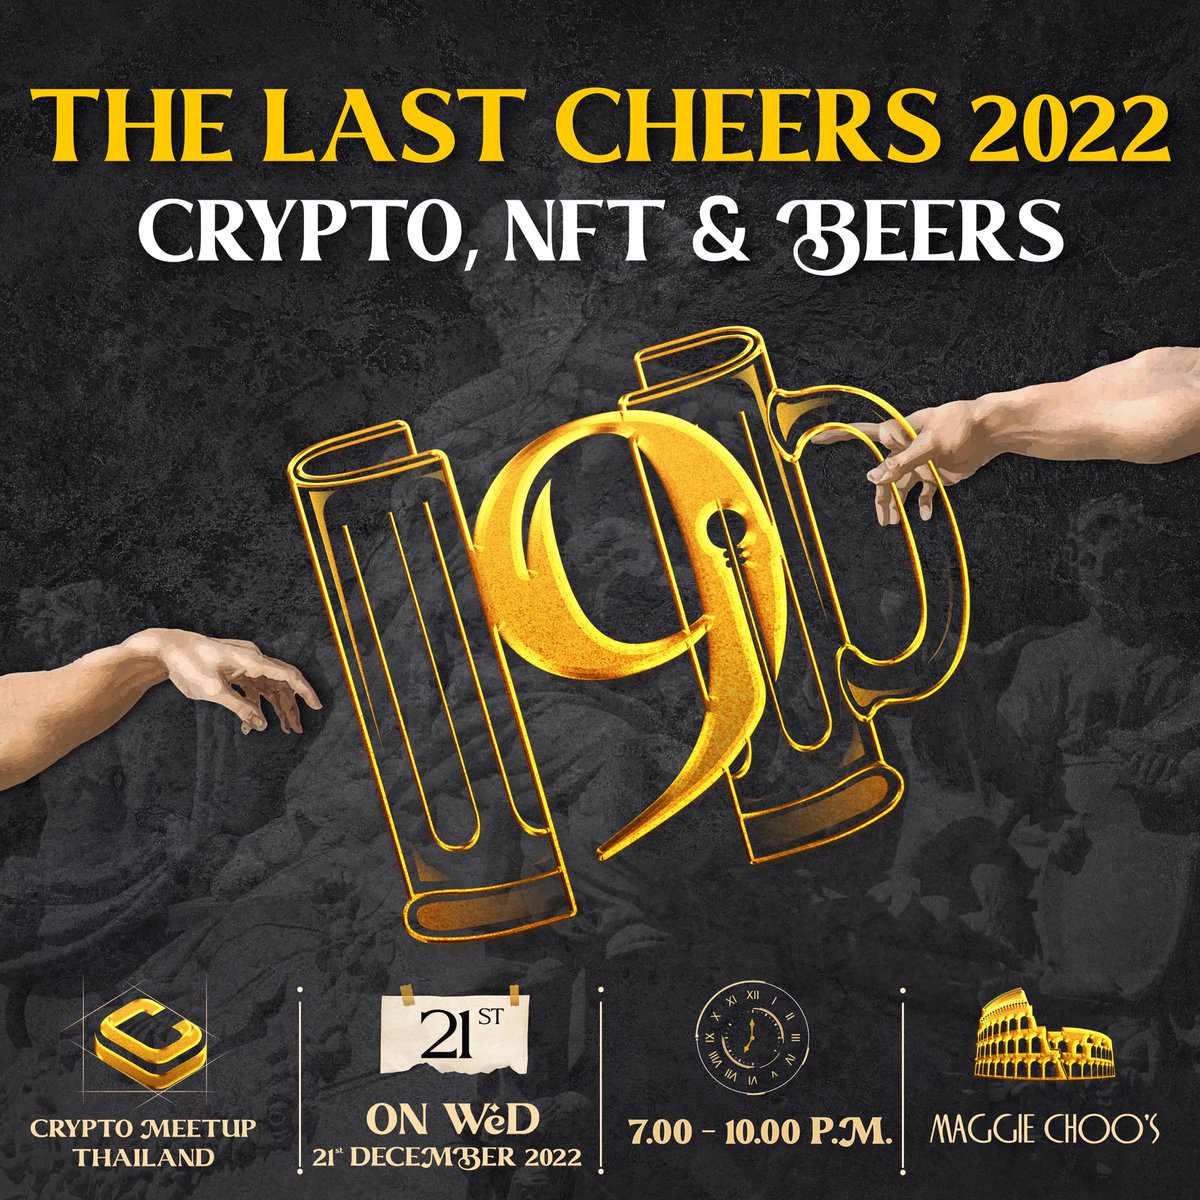 Crypto Meetup - Crypto, NFT and Beers ครั้งที่ 9 The Last Cheers 2022